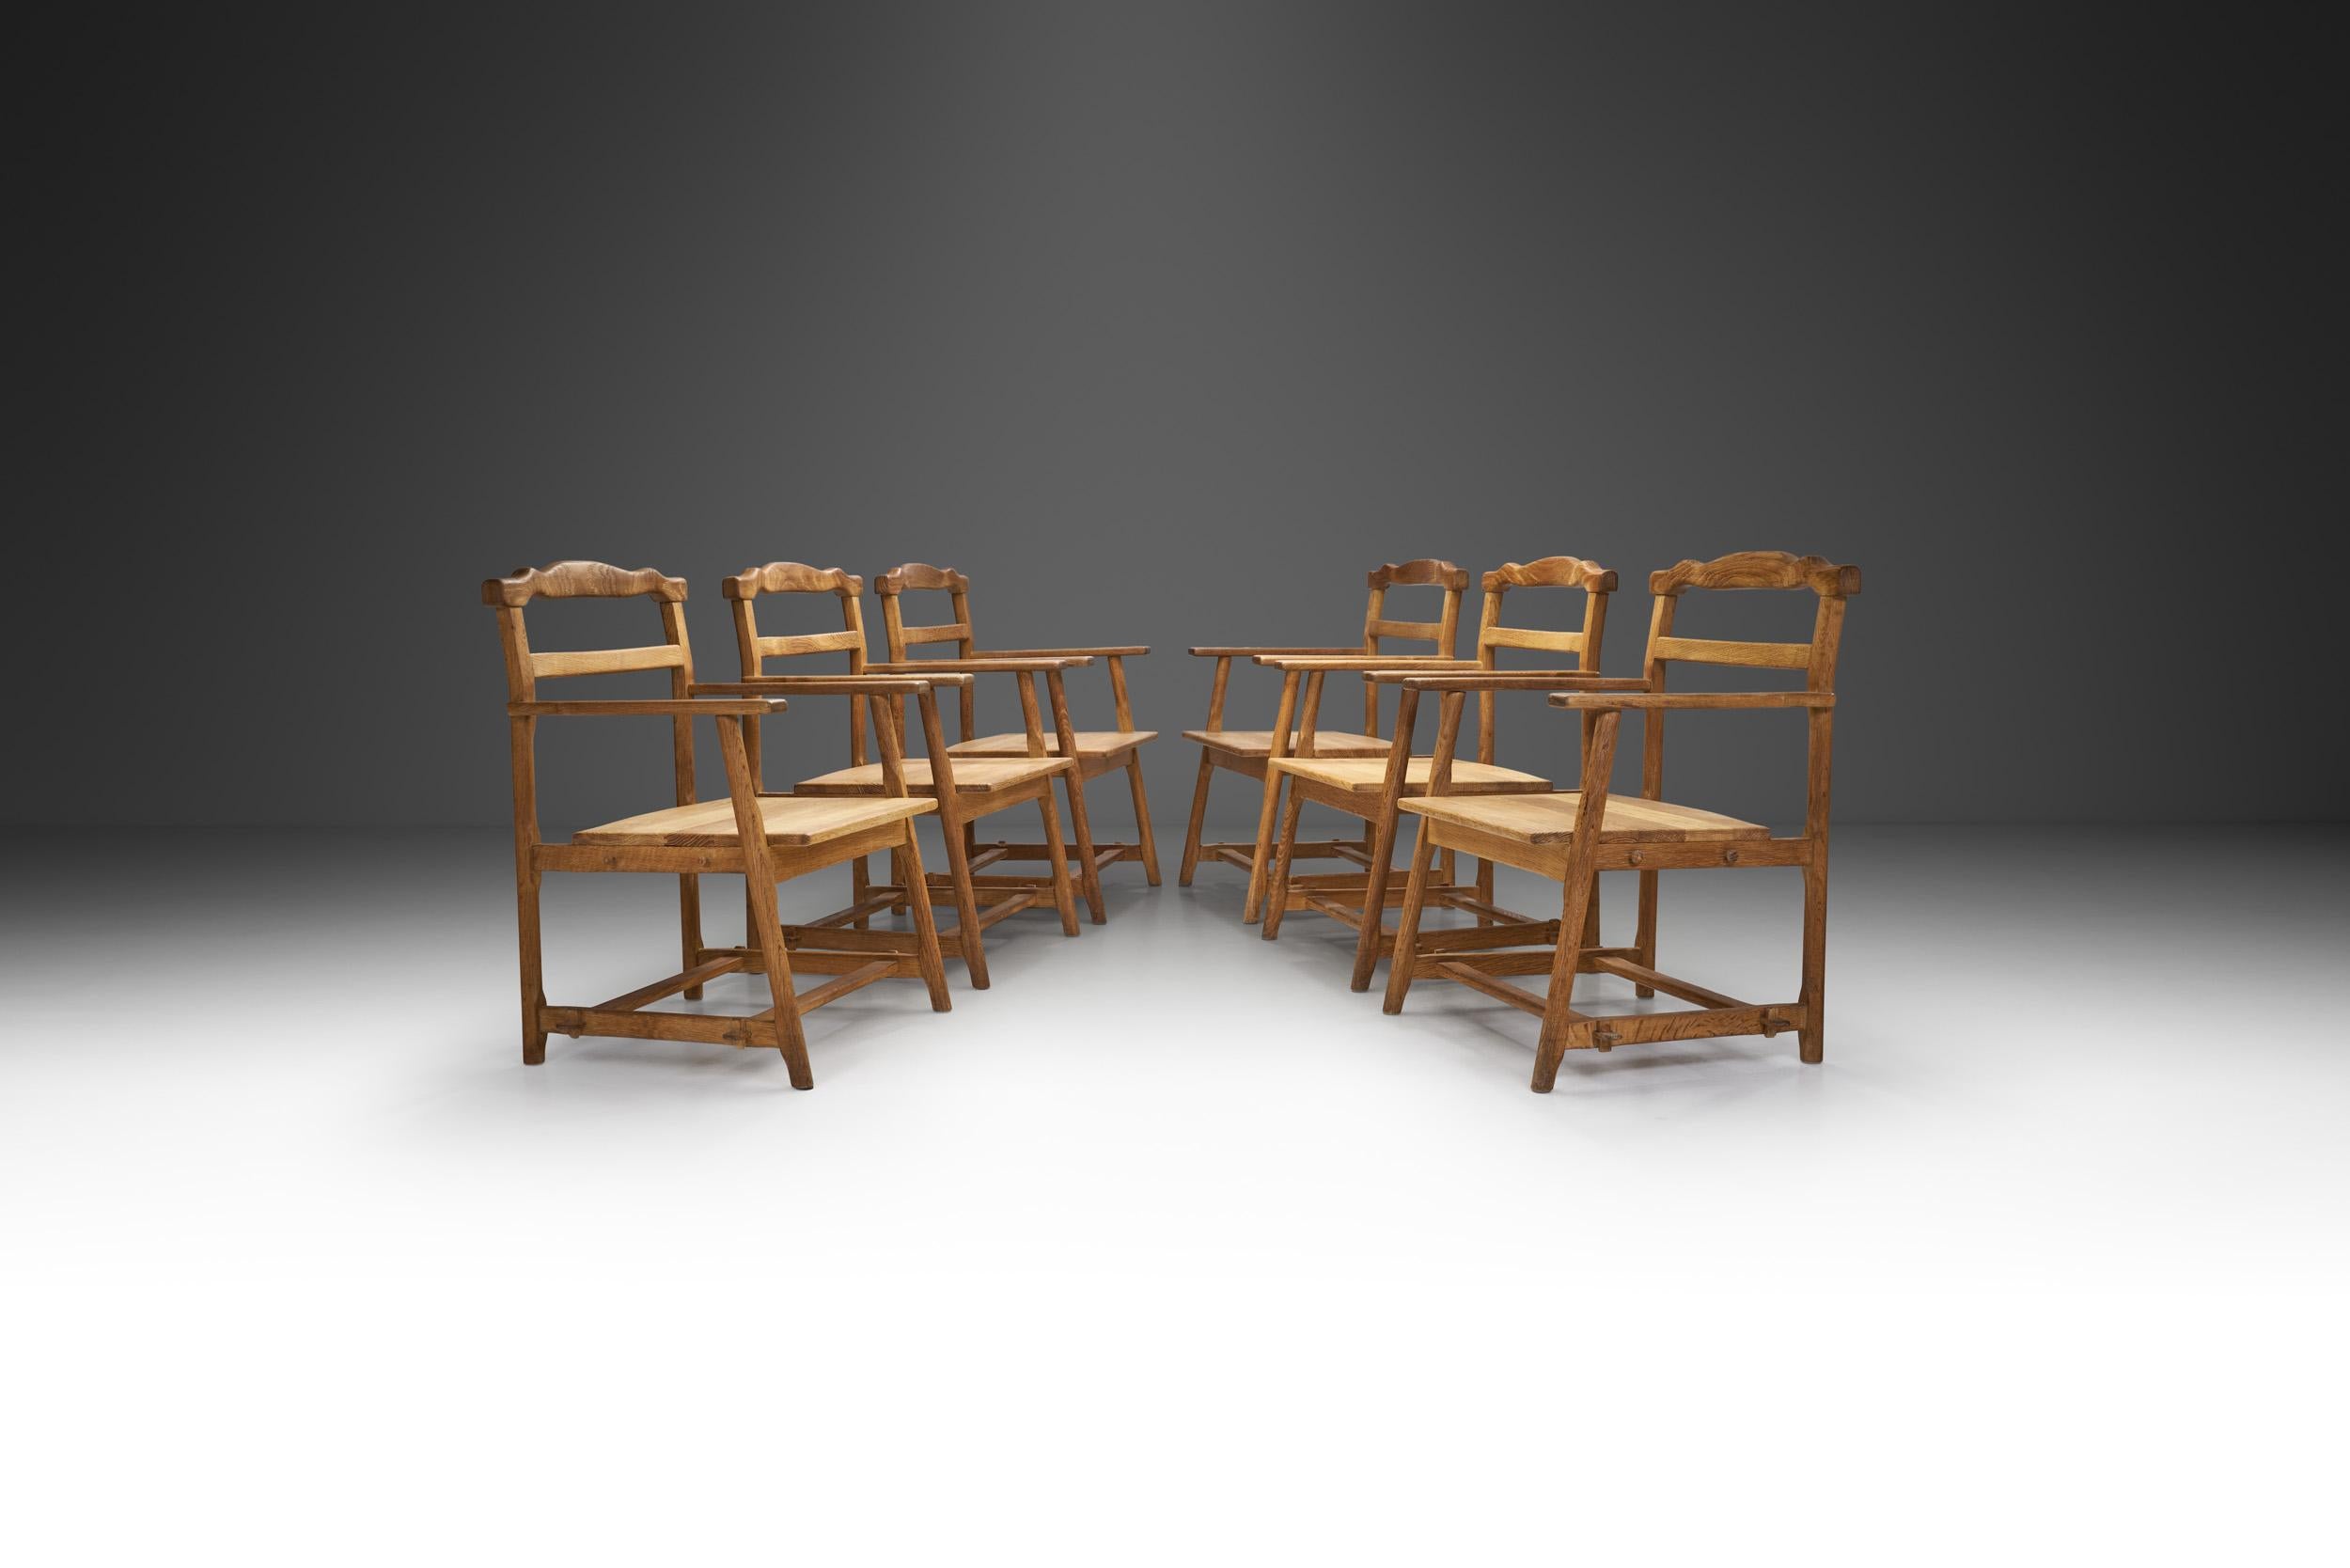 European Six Brutalist Solid Oak Dining Chairs with Upholstered Cushions, Europe 1960s For Sale